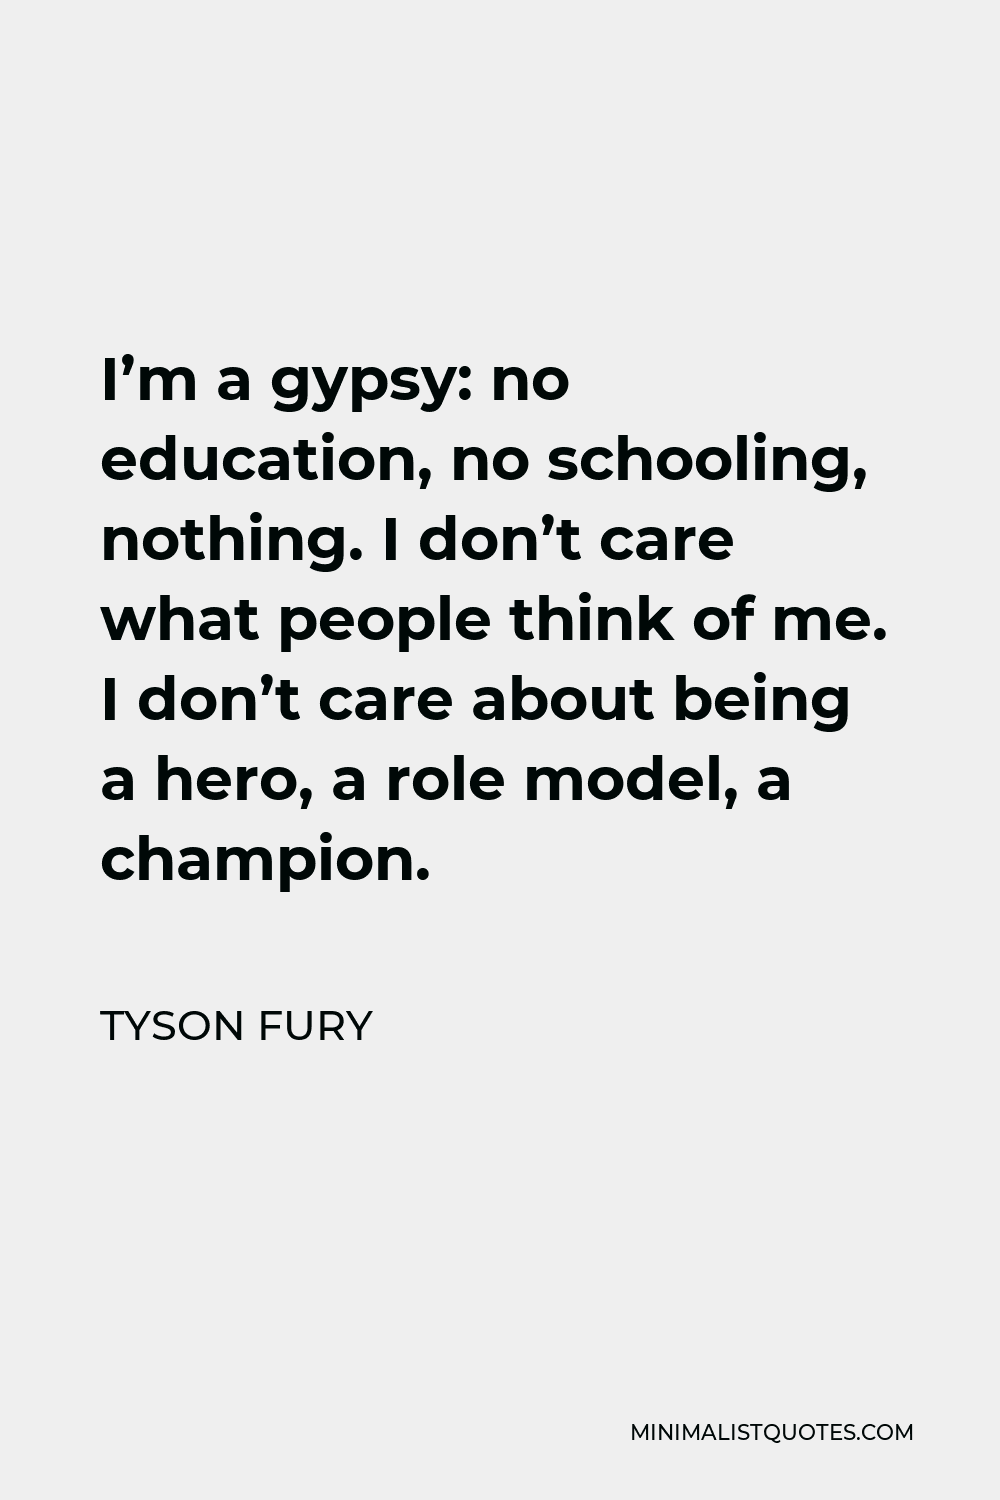 Tyson Fury Quote - I’m a gypsy: no education, no schooling, nothing. I don’t care what people think of me. I don’t care about being a hero, a role model, a champion.